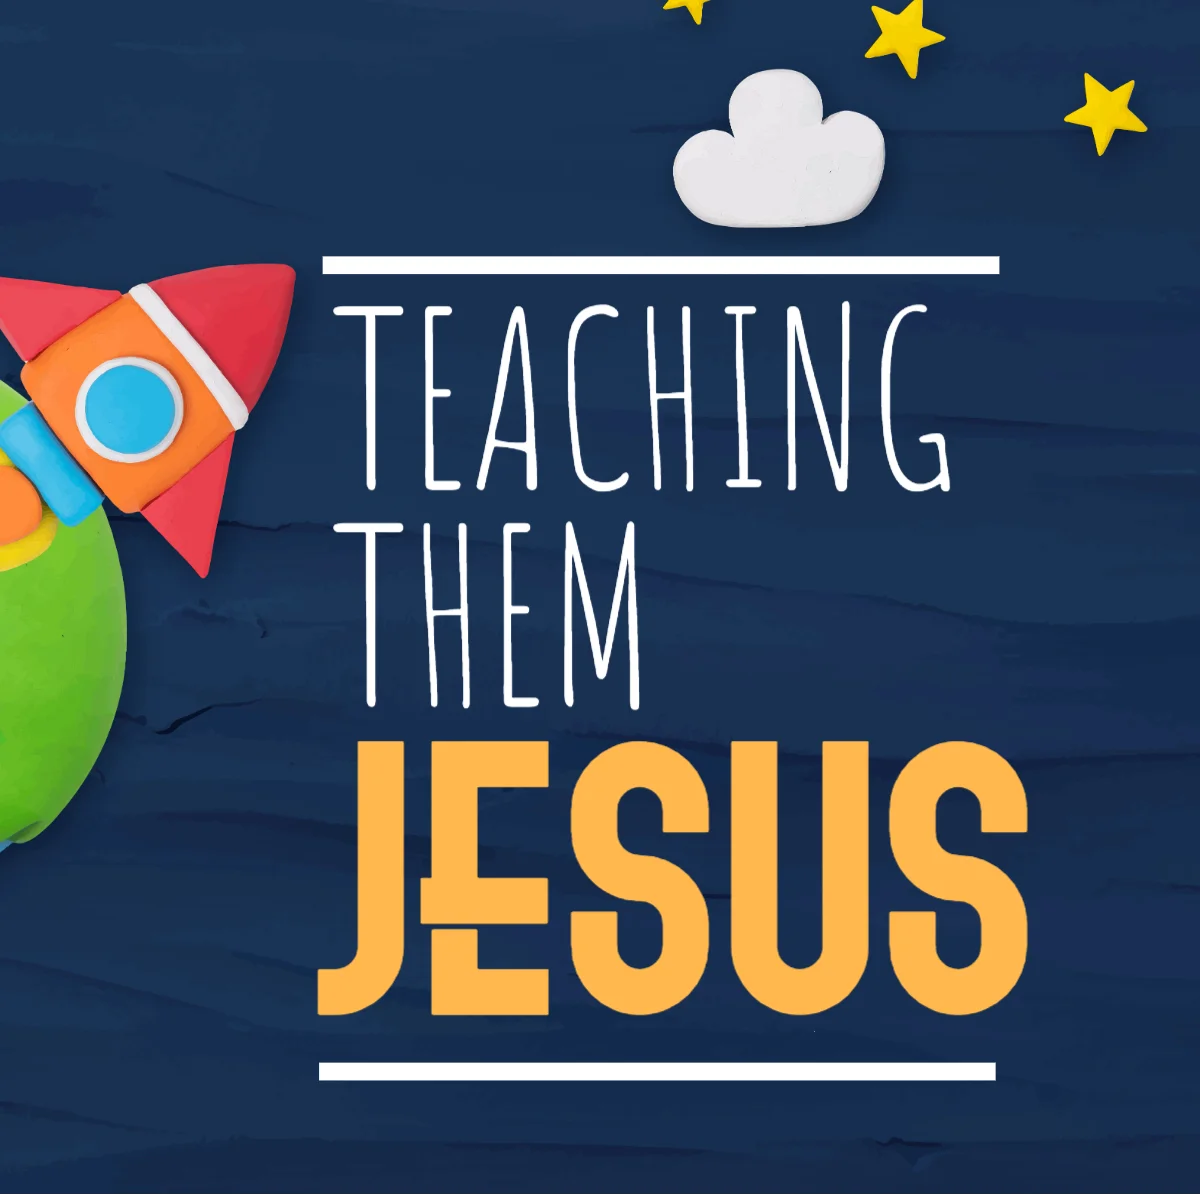 TEACHING THEM JESUS High Quality Children's Church Graphics For Free by Ministry Voice